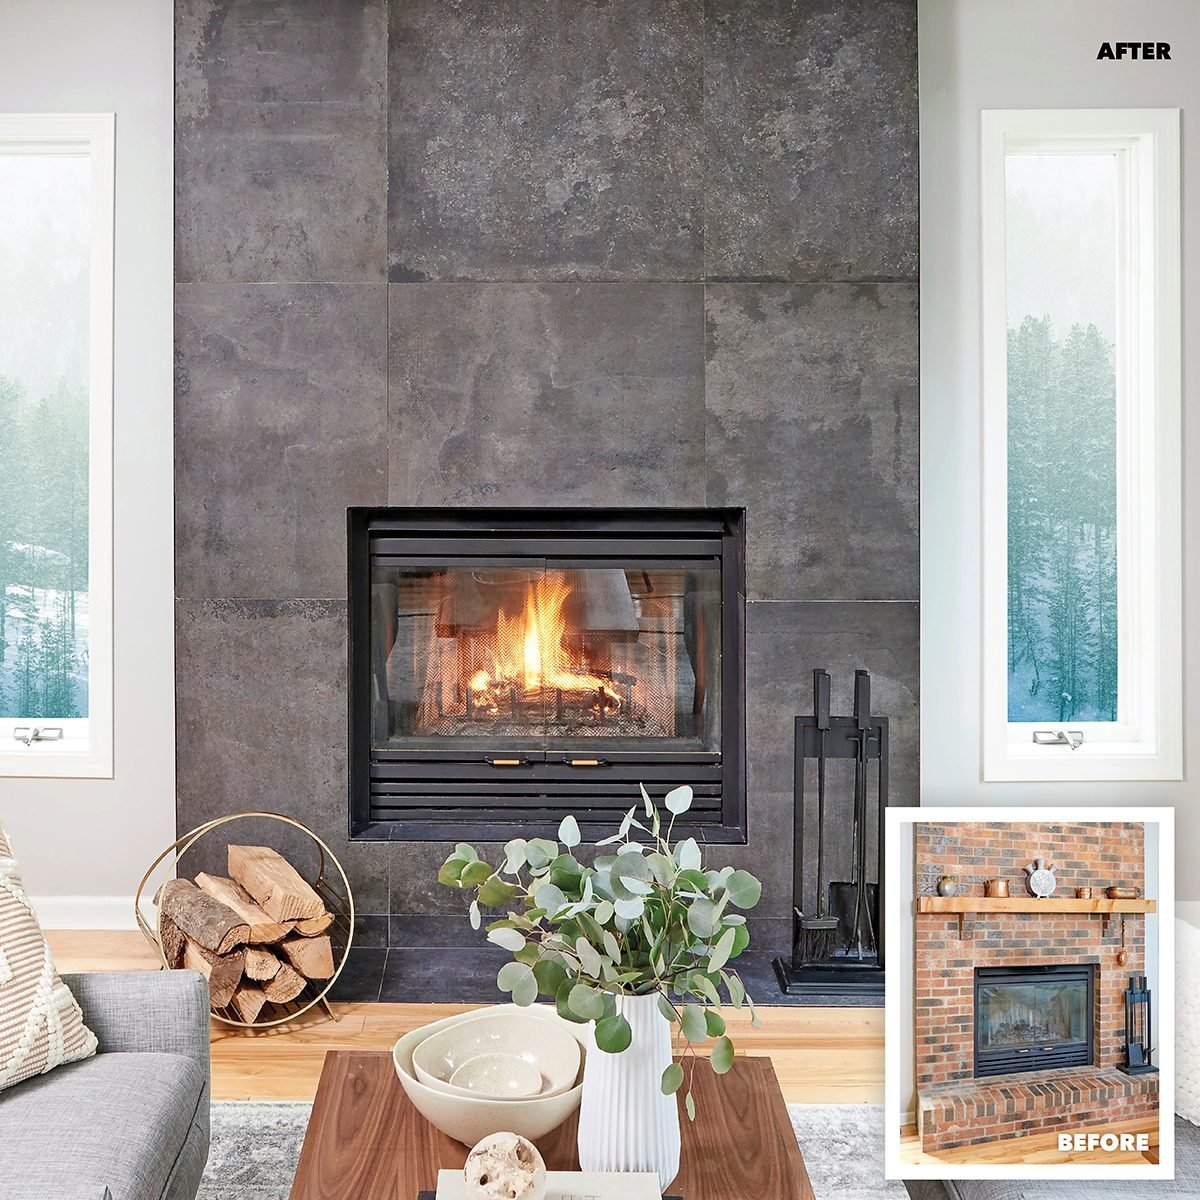 A Step-by-Step Guide to Fireplace Refacing